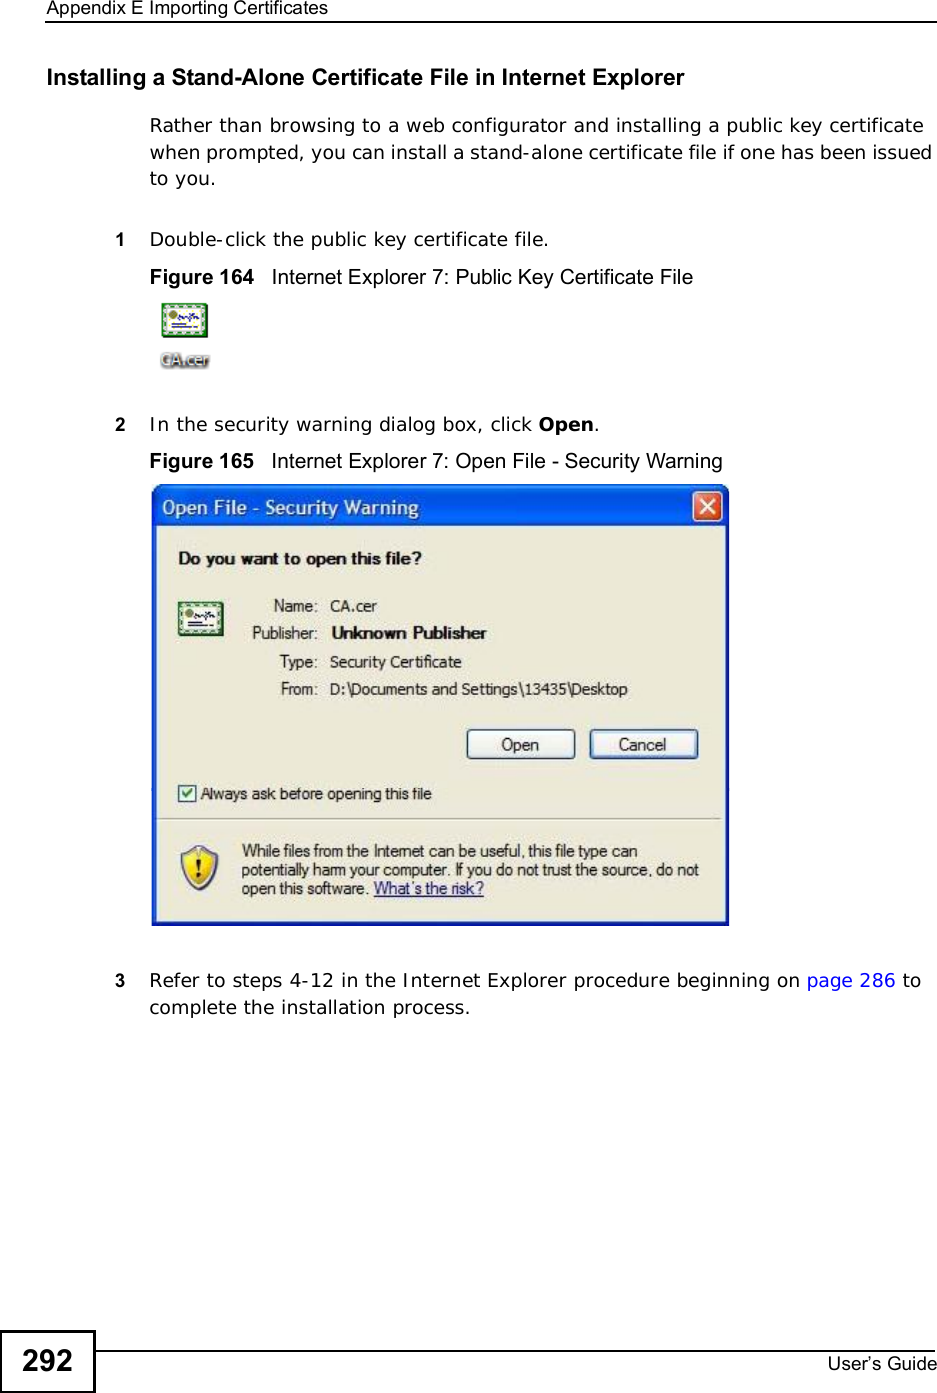 Appendix EImporting CertificatesUser s Guide292Installing a Stand-Alone Certificate File in Internet ExplorerRather than browsing to a web configurator and installing a public key certificate when prompted, you can install a stand-alone certificate file if one has been issued to you.1Double-click the public key certificate file.Figure 164   Internet Explorer 7: Public Key Certificate File2In the security warning dialog box, click Open.Figure 165   Internet Explorer 7: Open File - Security Warning3Refer to steps 4-12 in the Internet Explorer procedure beginning on page286 to complete the installation process.